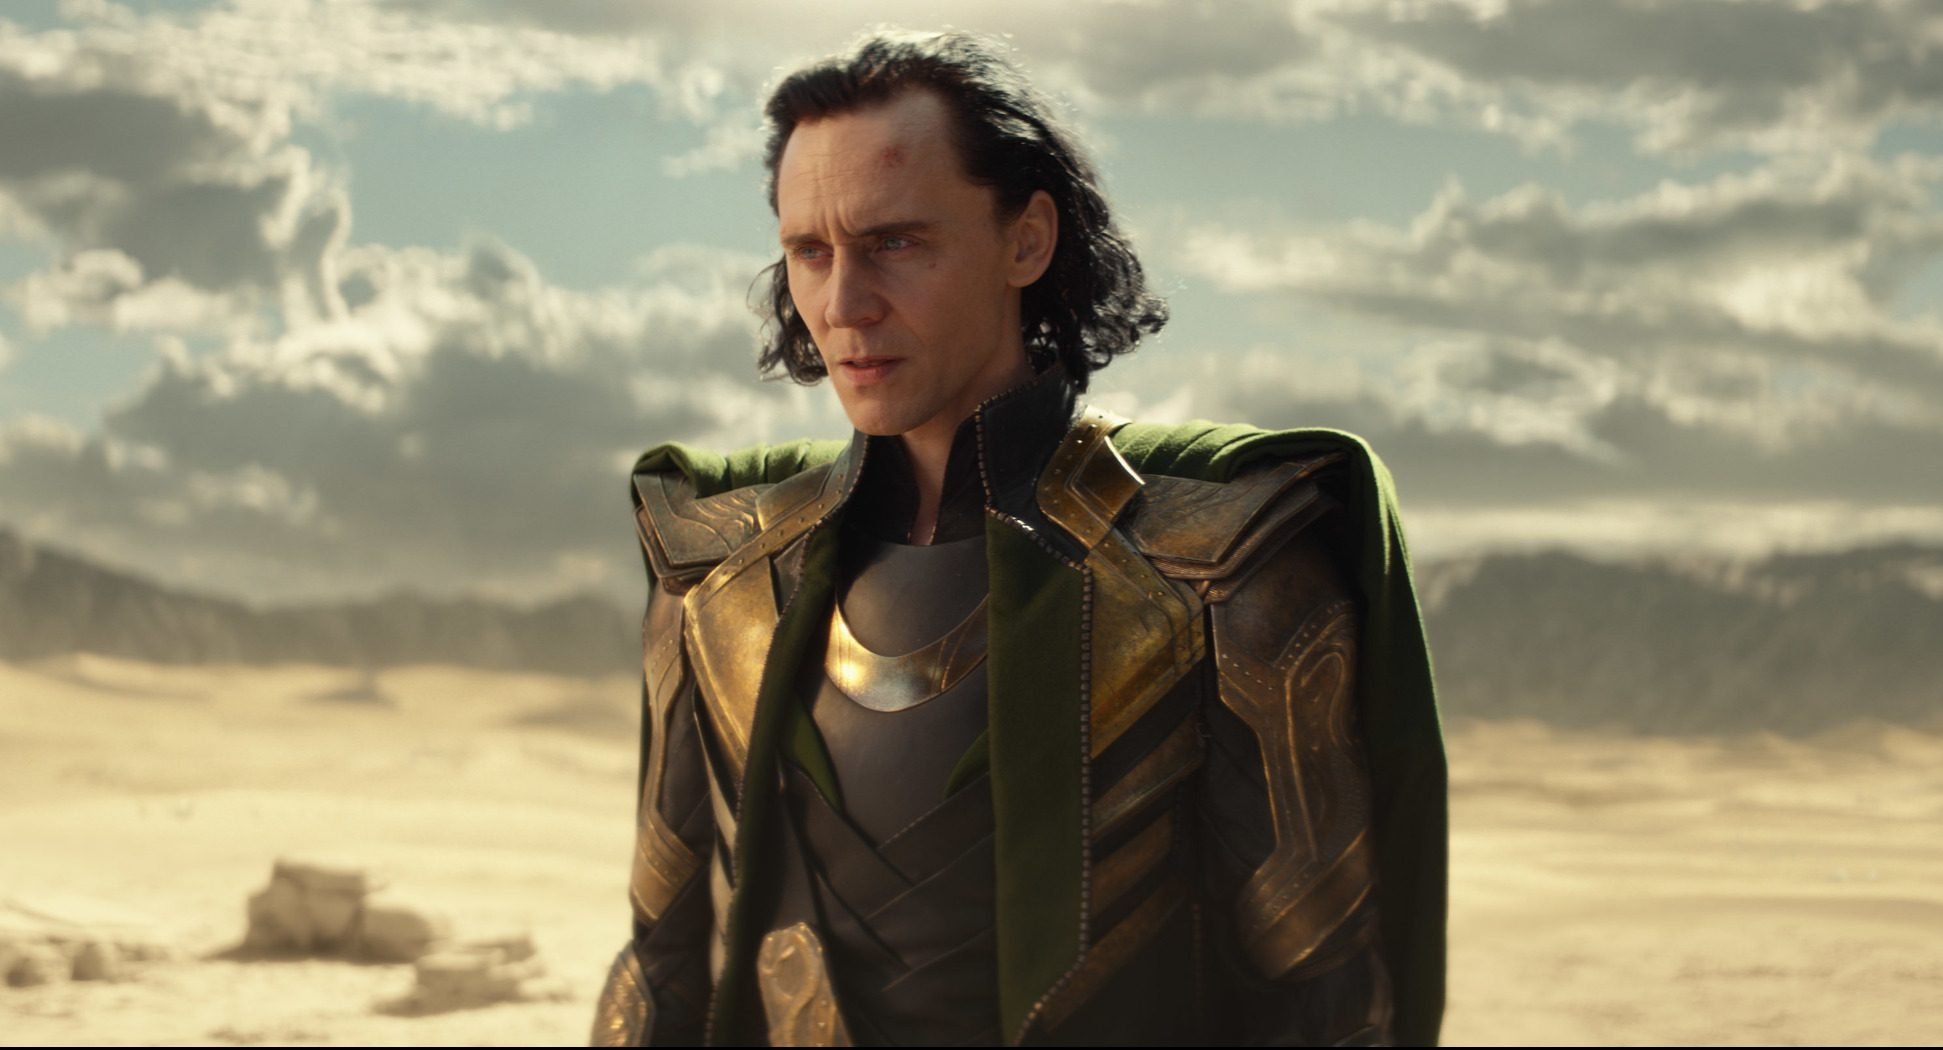 1 of Loki’s Most Memorable Moments Happened When Tom Hiddleston ‘Ran out of Choreography’